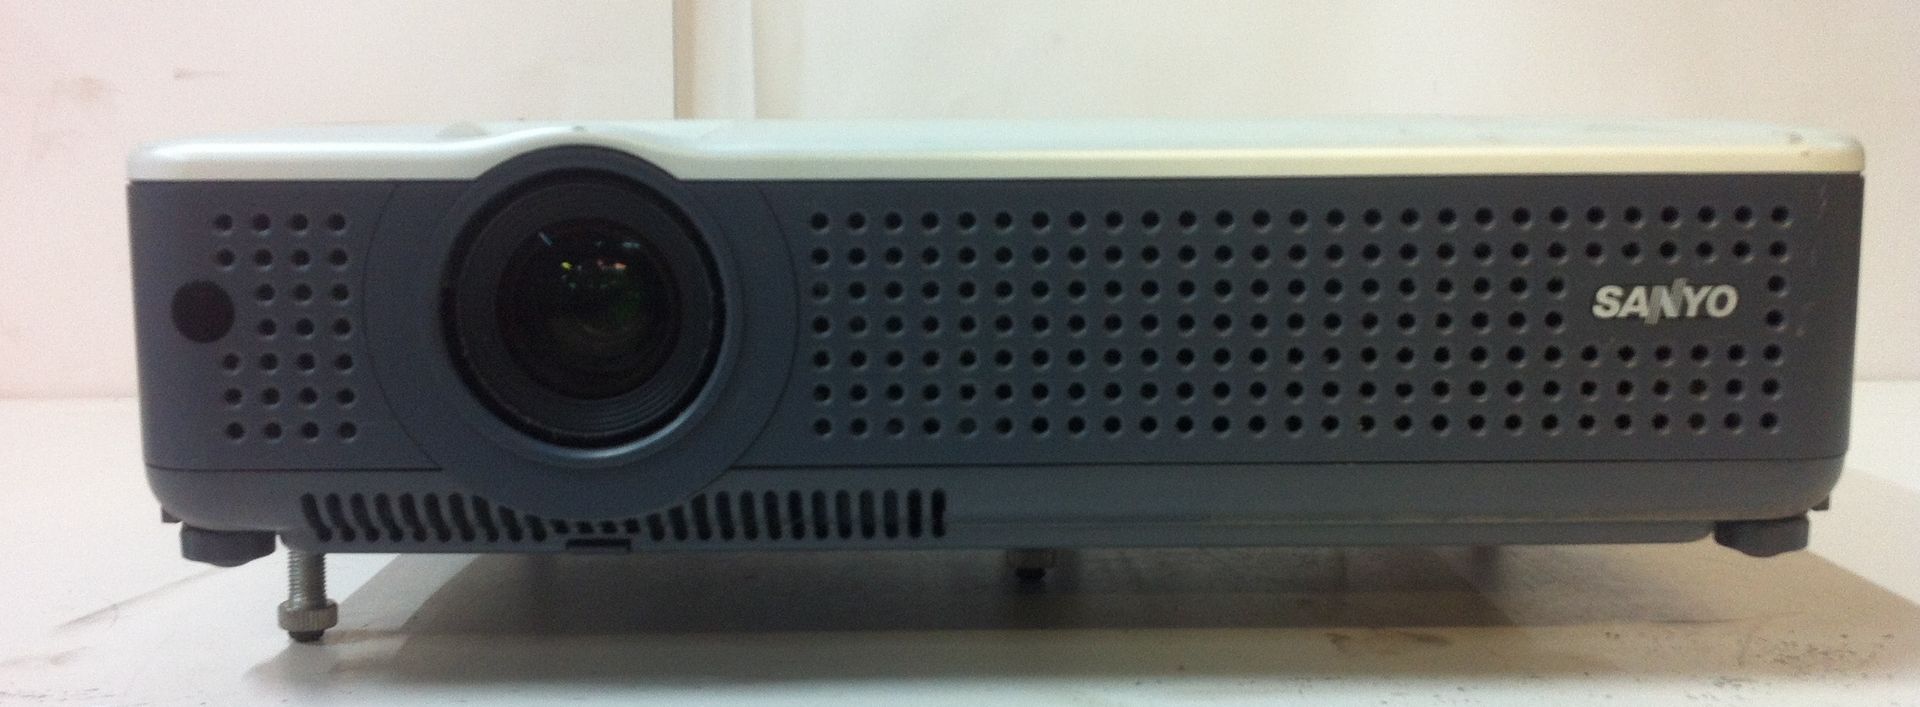 Sanyo pro multiverse projector - Image 2 of 3